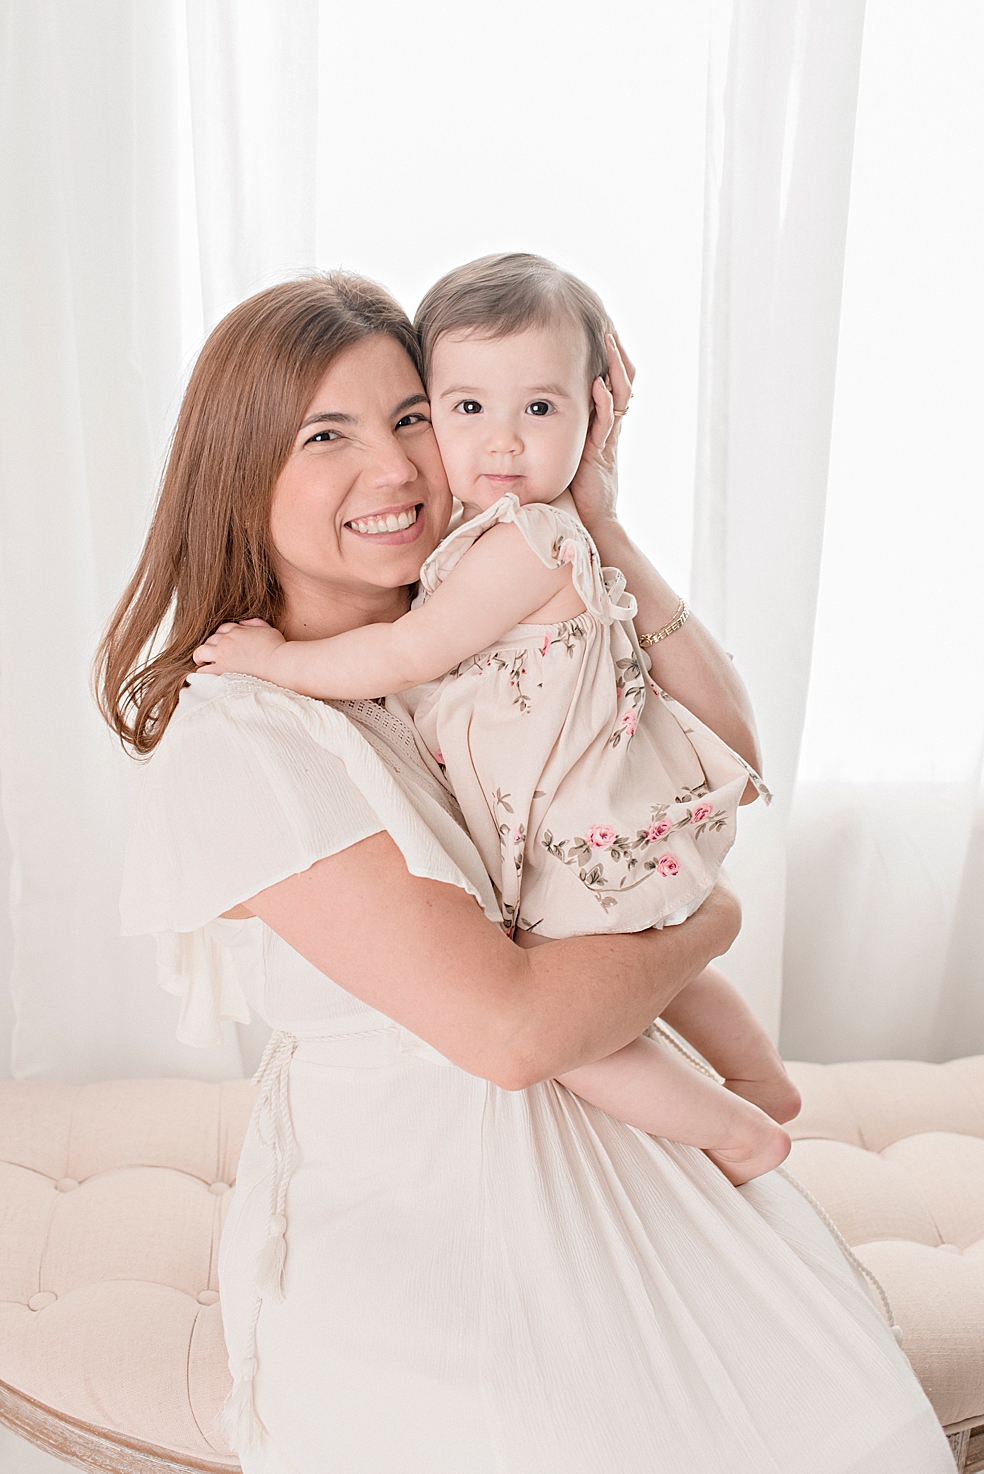 Mom and baby girl during baby's milestone session | Photo by Jessica Lee Photography